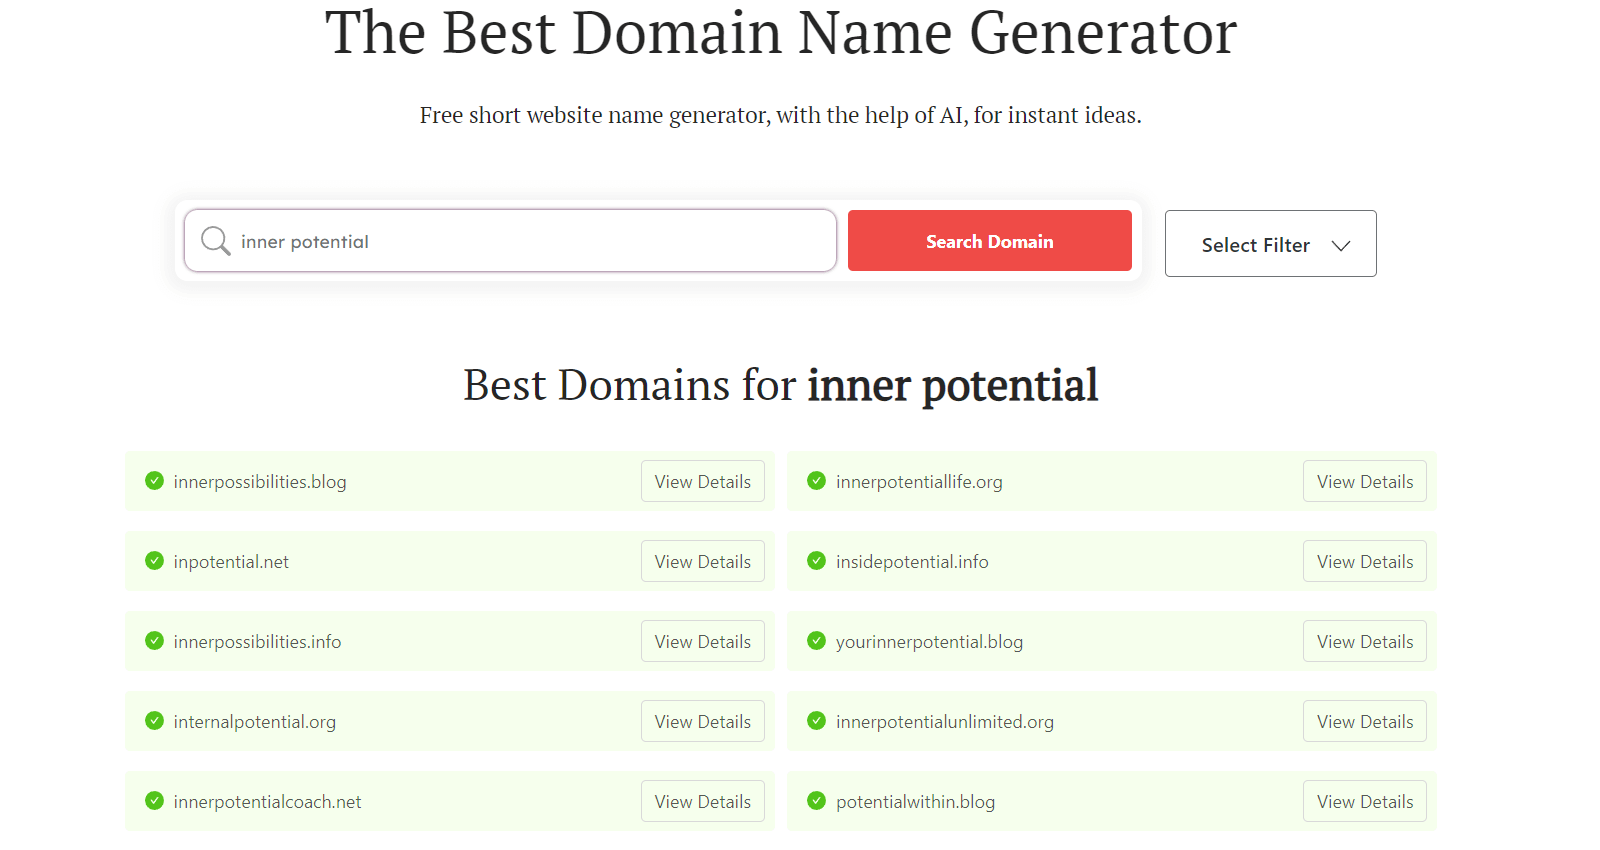 DomainWheel life coach business name generator search results for "inner potential"